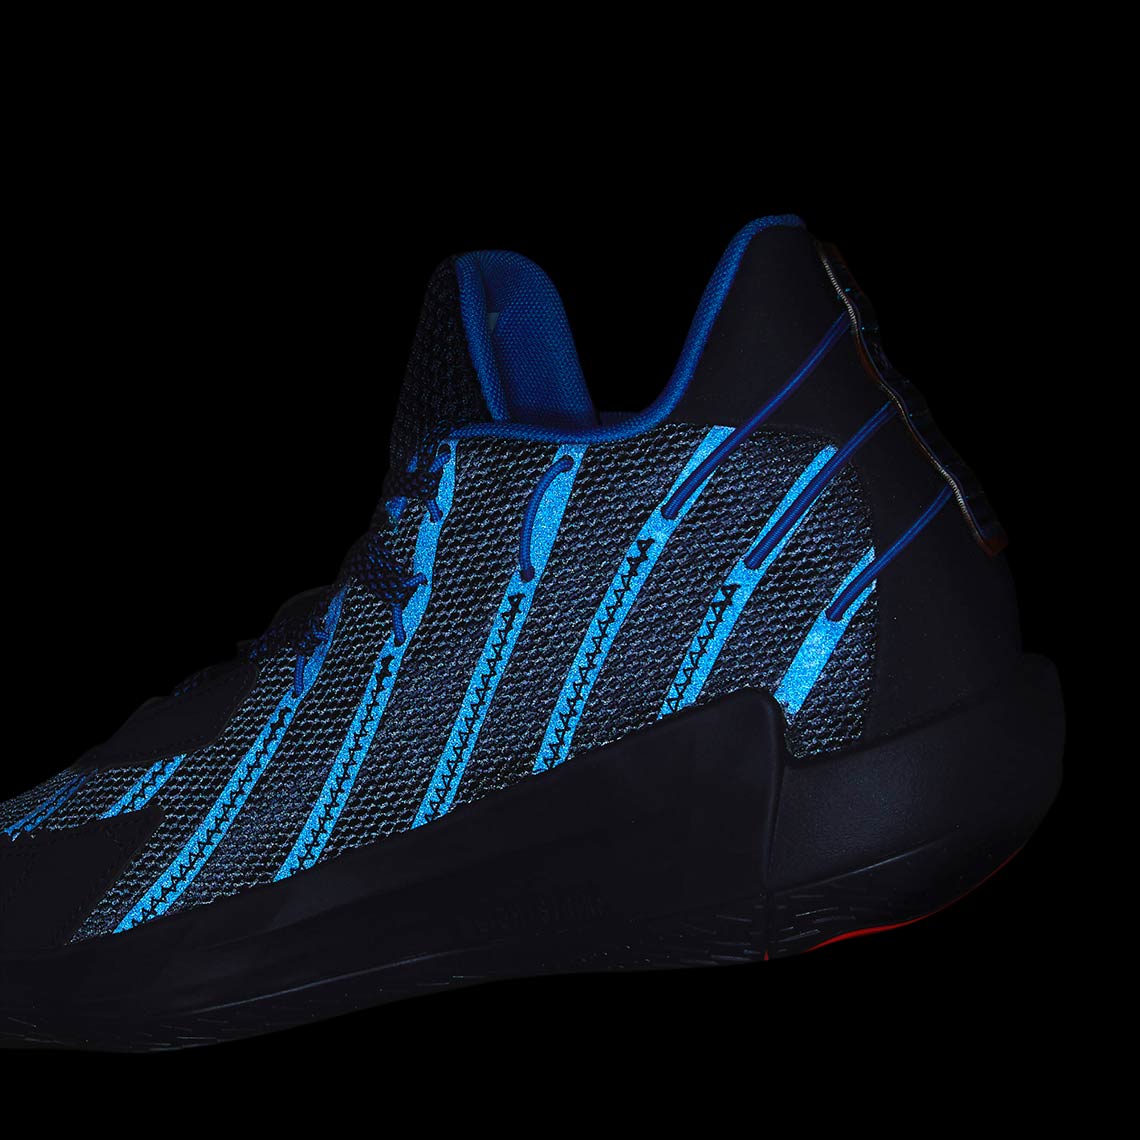 Adidas Dame 7 Lights Out Fz1103 Release Date 9